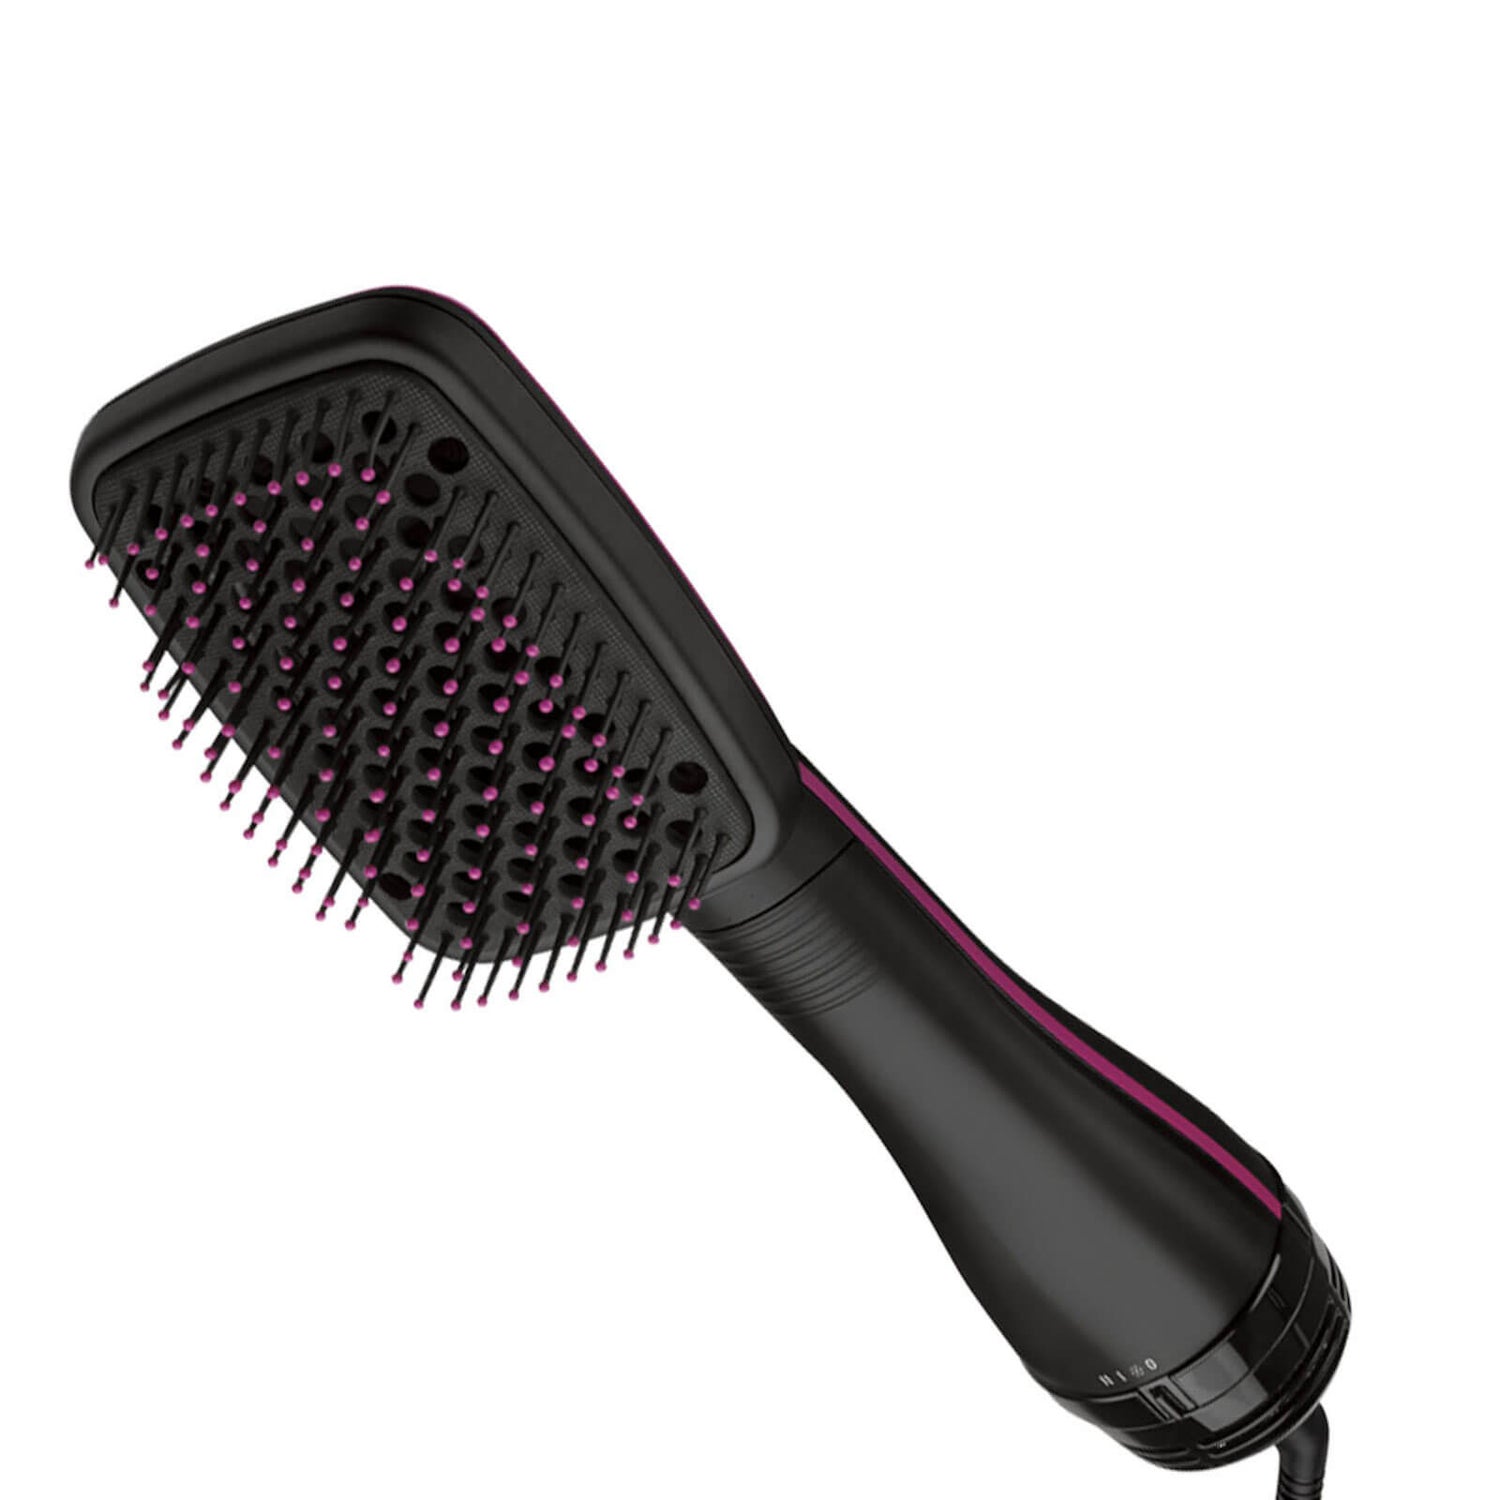 Discover Revlon's One-Step Hair Dryer and Styler